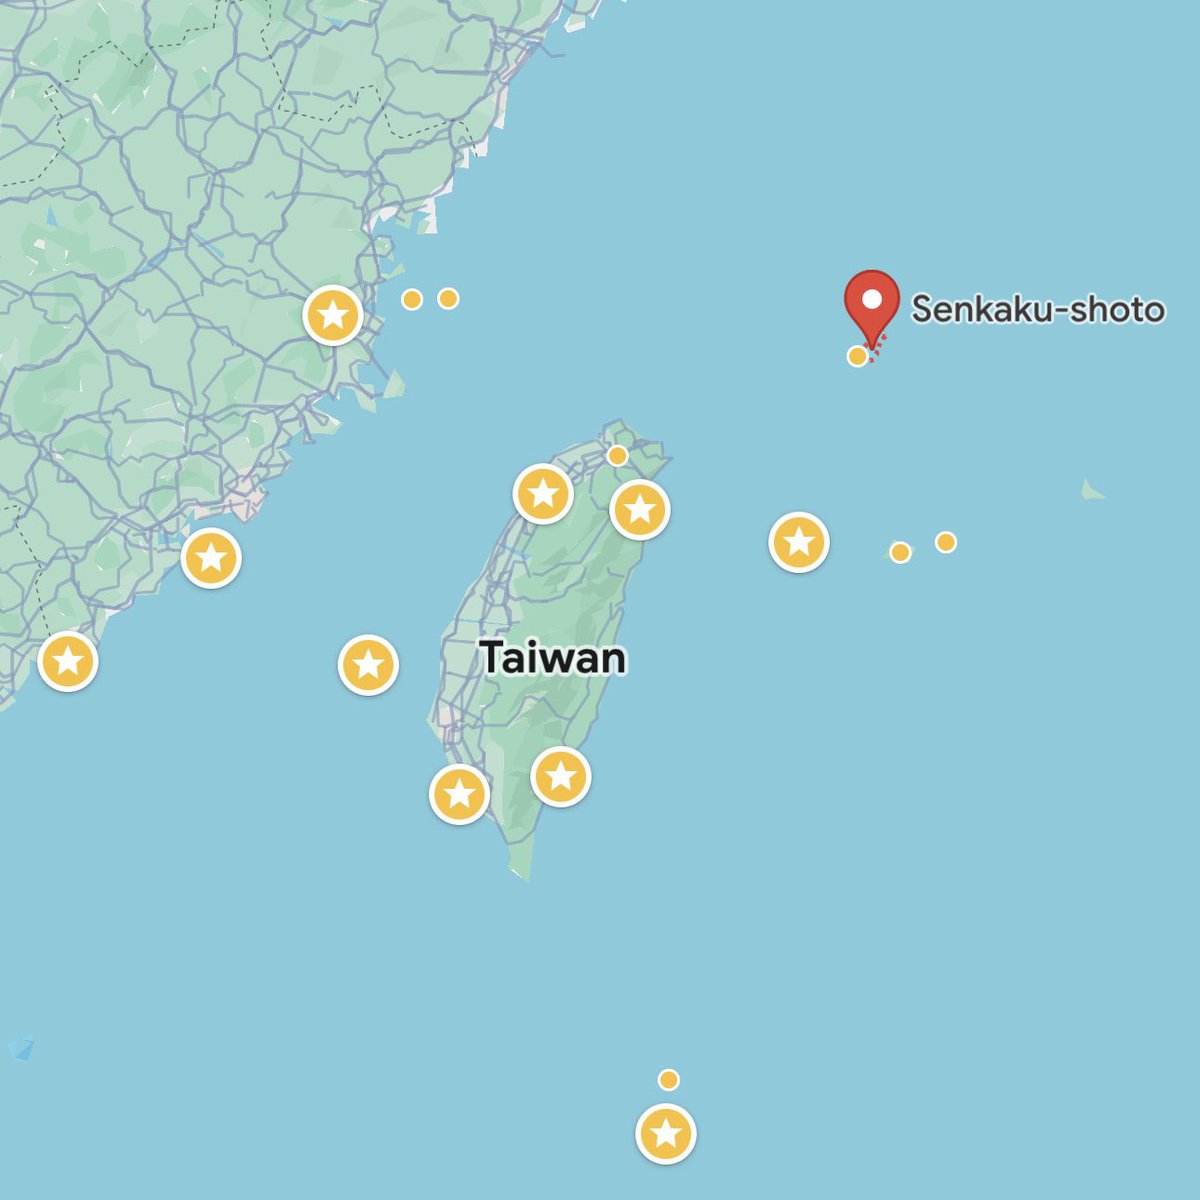 For 5 days in a row, 4 Chinese Coast Guard ships have repeatedly entered the 12-mile territorial limit around Japan's Senkaku islands.  CCG drove away & expelled Japanese patrol boats & have been spotted sailing within Japan's EEZ for 186 days straight, the longest record ever